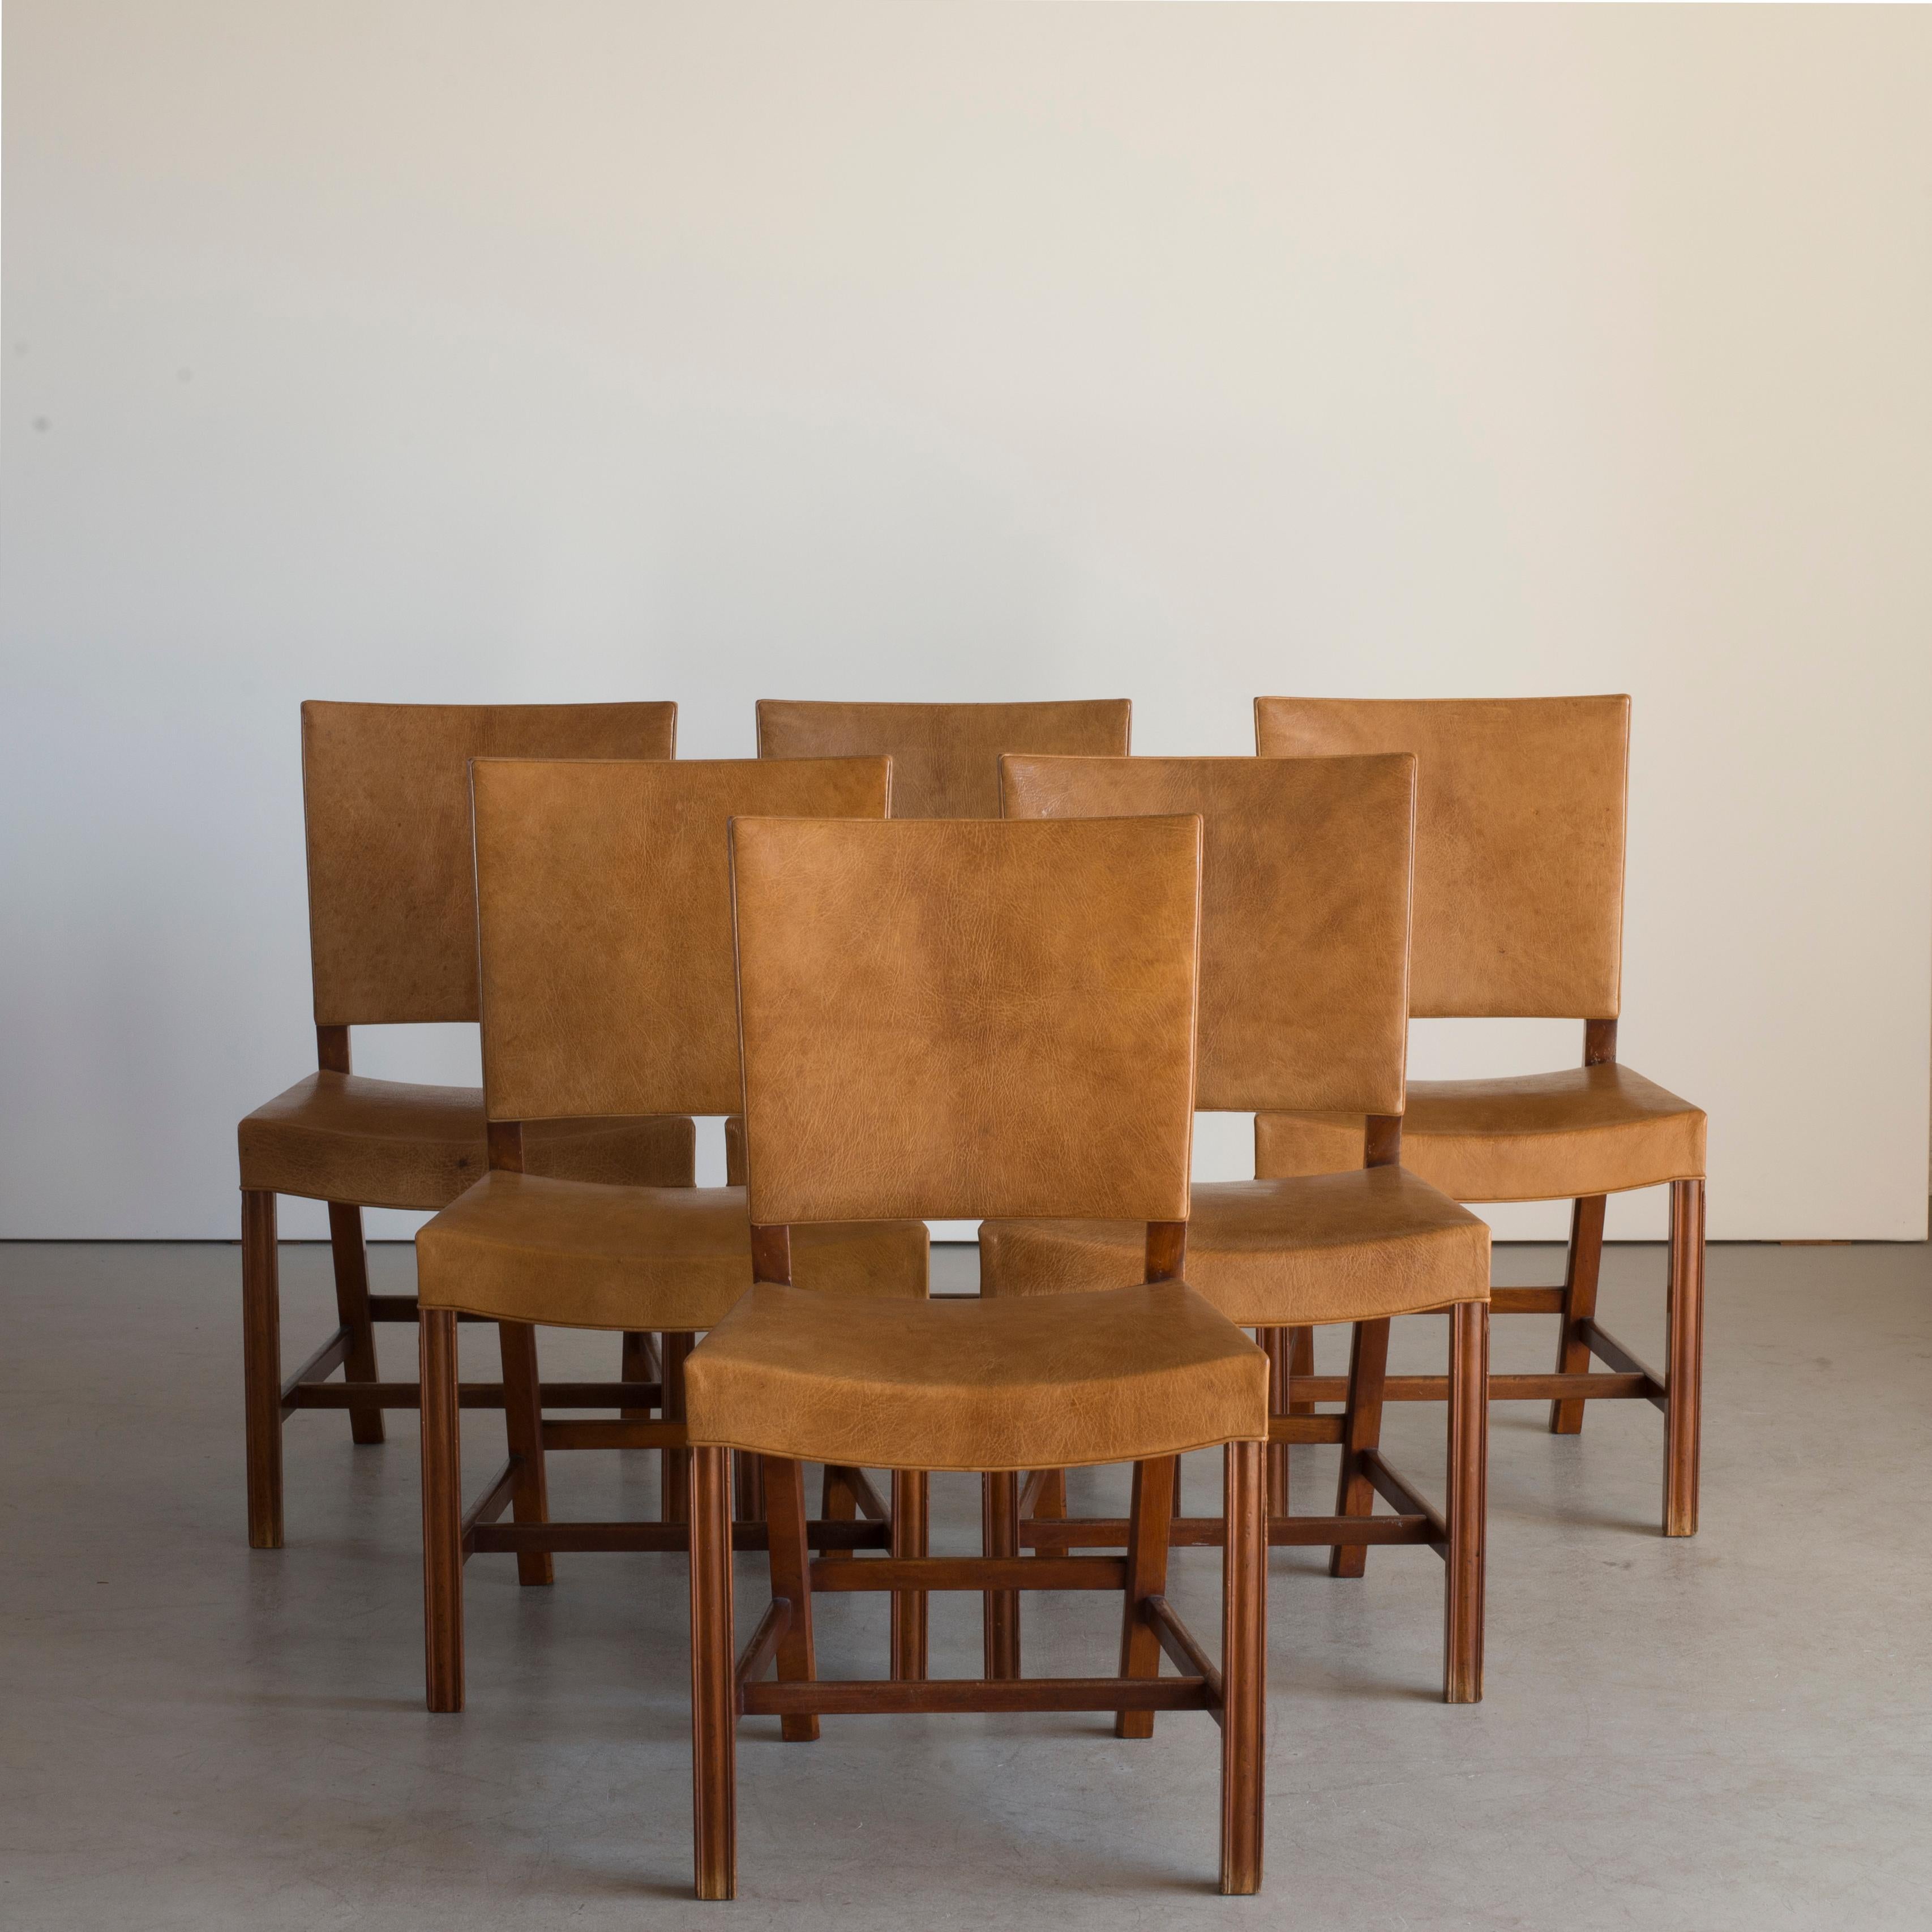 Kaare Klint set of six red chairs. Executed by Rud. Rasmussen, 1930-1934

Mahogany and Niger leather.

Underside with manufacturer's paper label RUD. RASMUSSENS/SNEDKERIER/45 NØRREBROGAD/KØBENHAVN, penciled number and architect's monogrammed paper